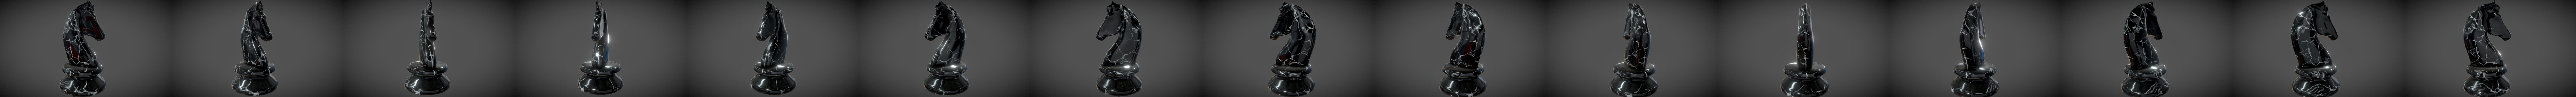 White chess piece horse 3d on background Vector Image